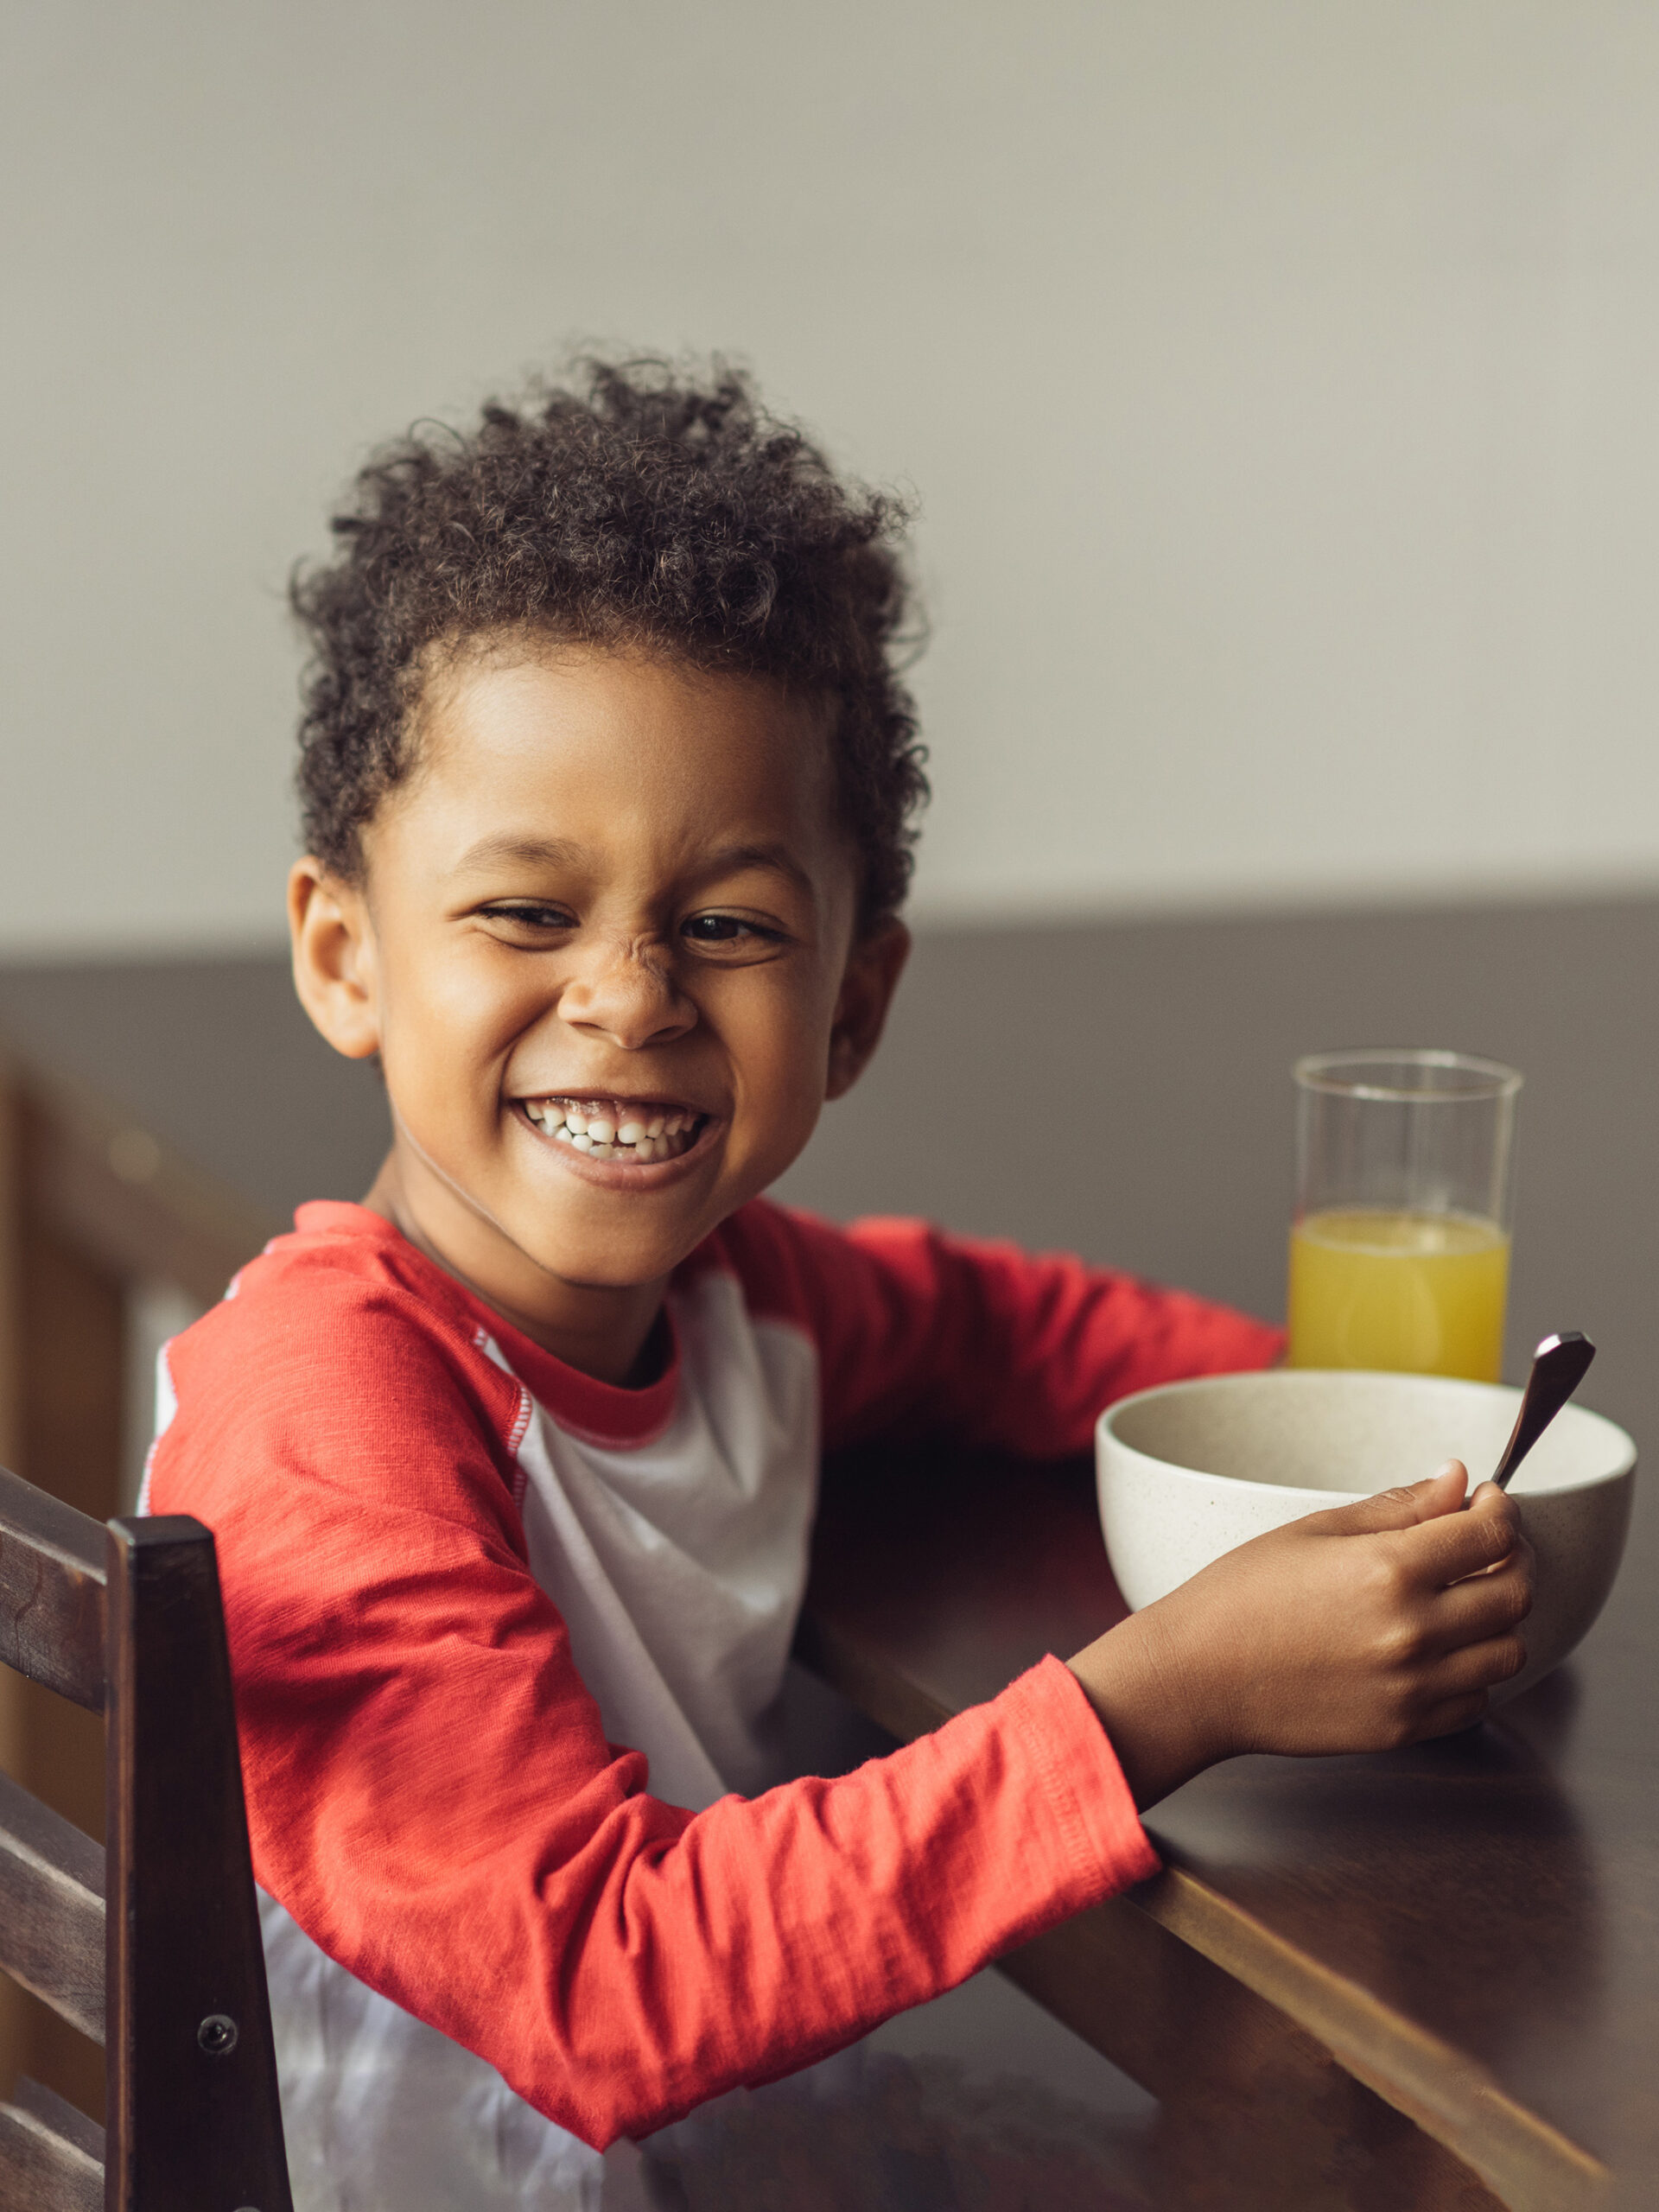 Boy smiles while eating breakfast